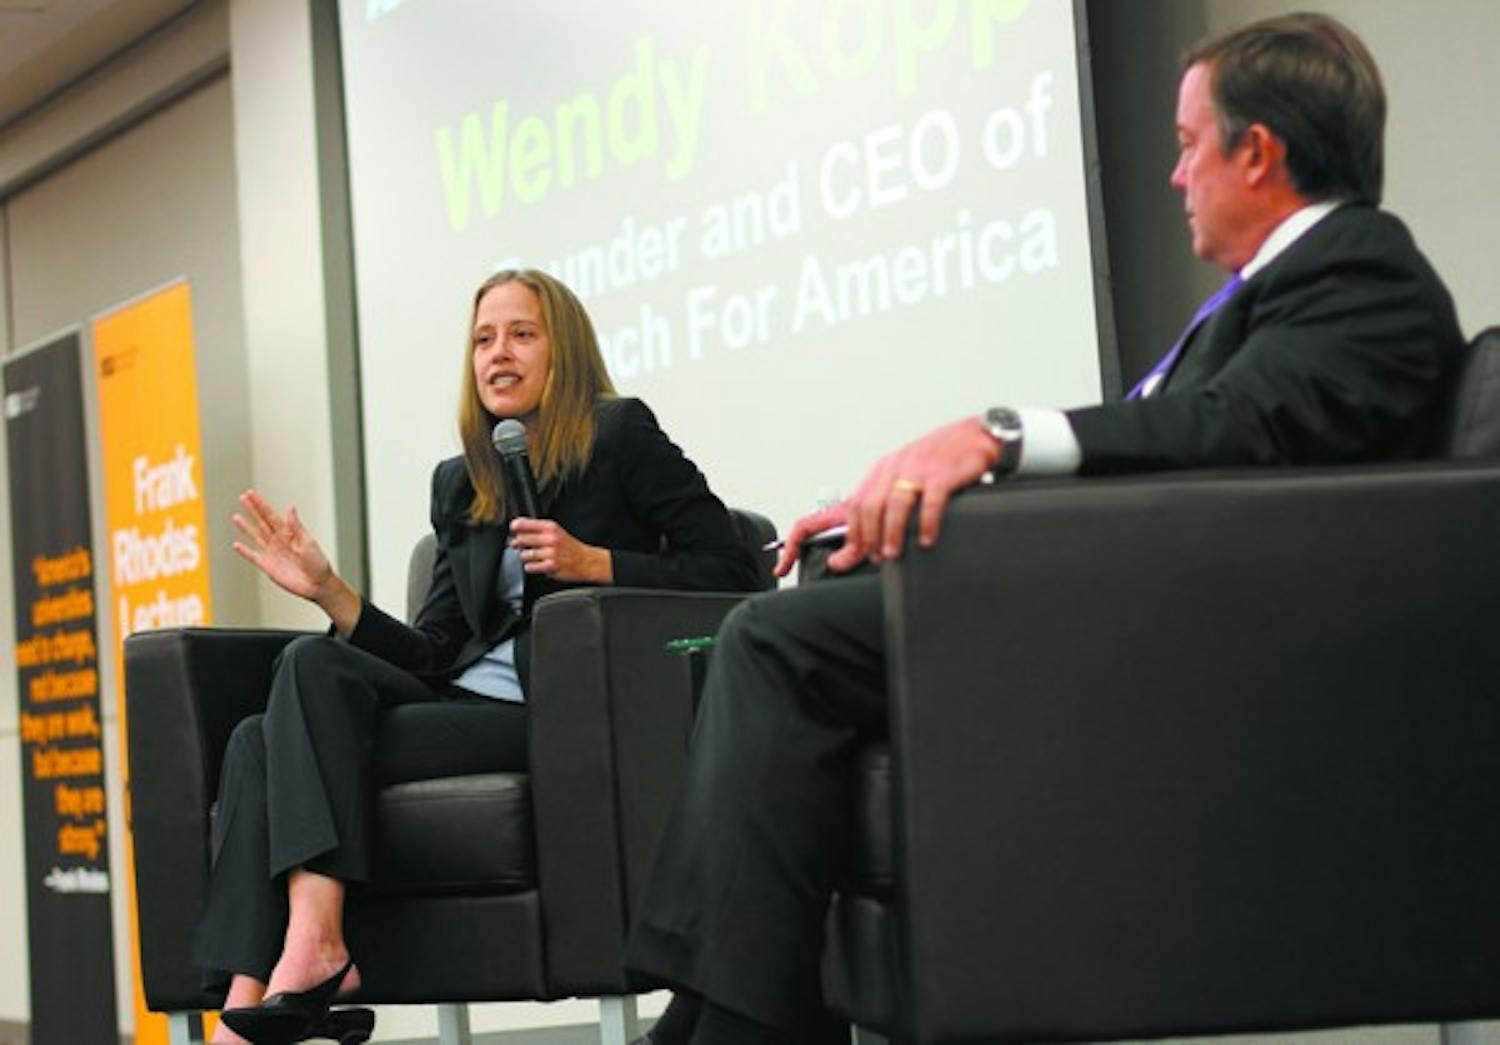 ASU President Michael Crow listens as Teach For America founder and CEO Wendy Kopp speaks in the Memorial Union Tuesday evening as part of the Frank Rhodes Lecture Series on the Creation of the Future: A Lecture Series for a New American University. (Photo by Lisa Bartoli)